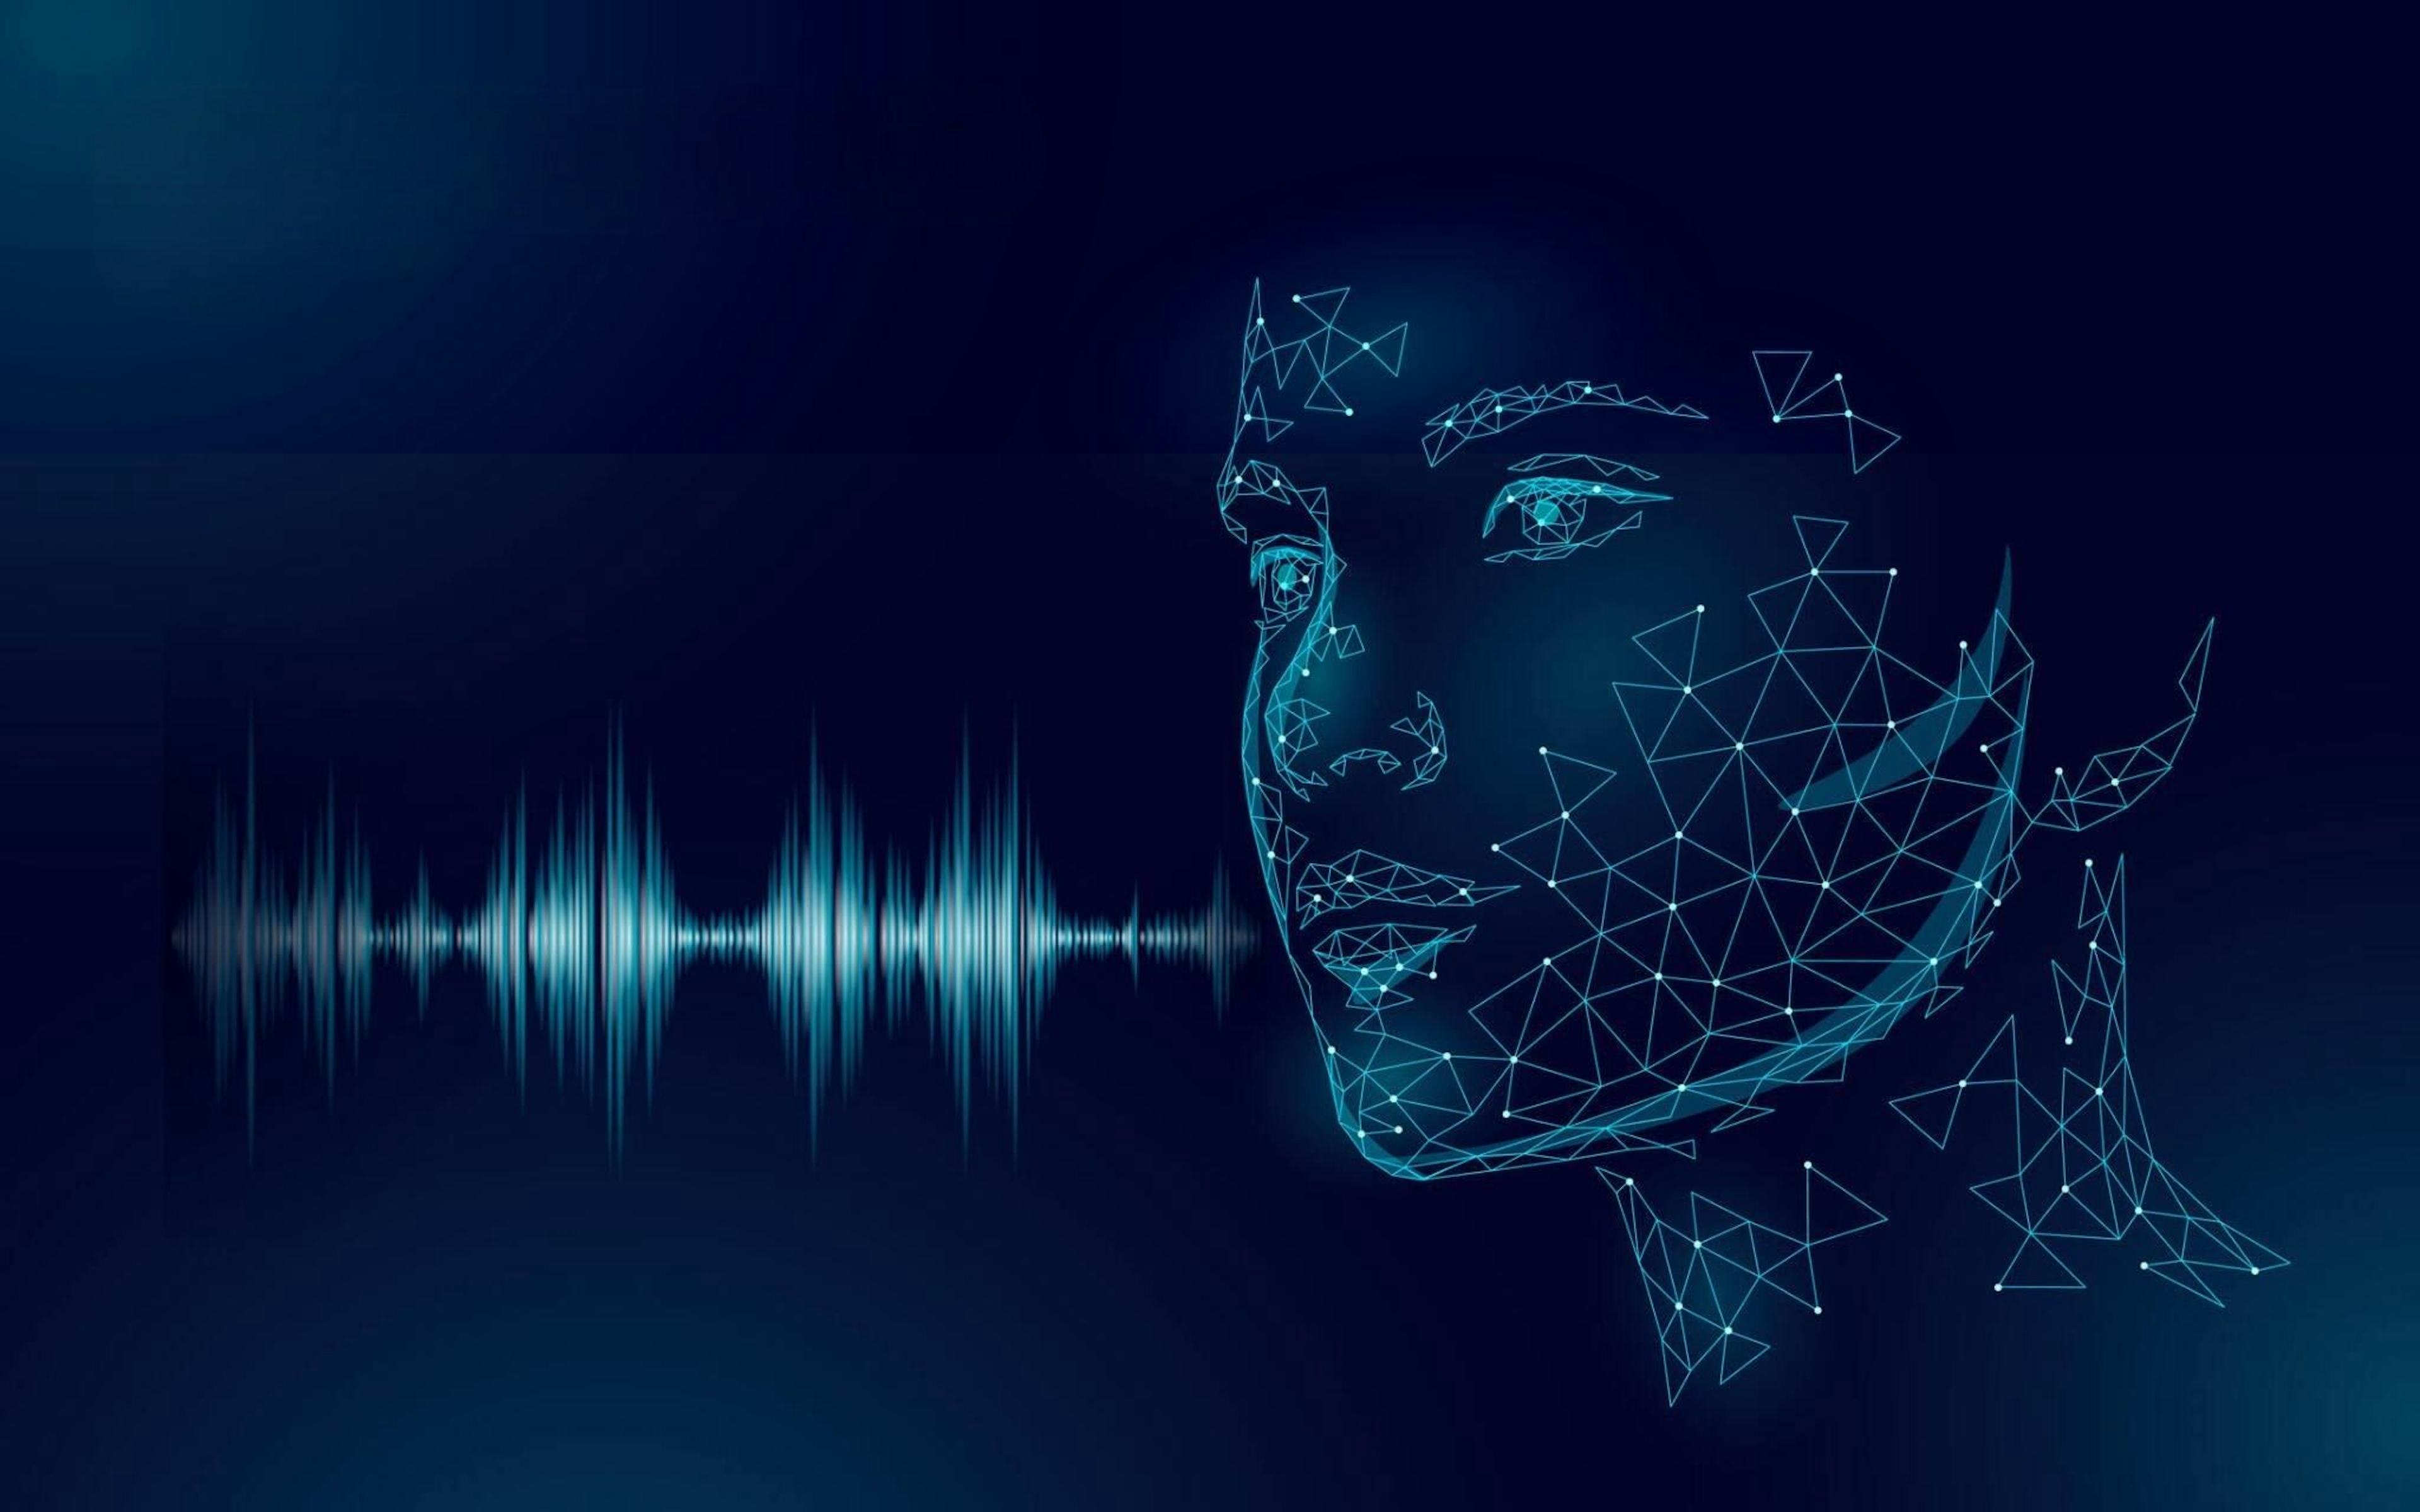 wireframe human face with a sound waveform